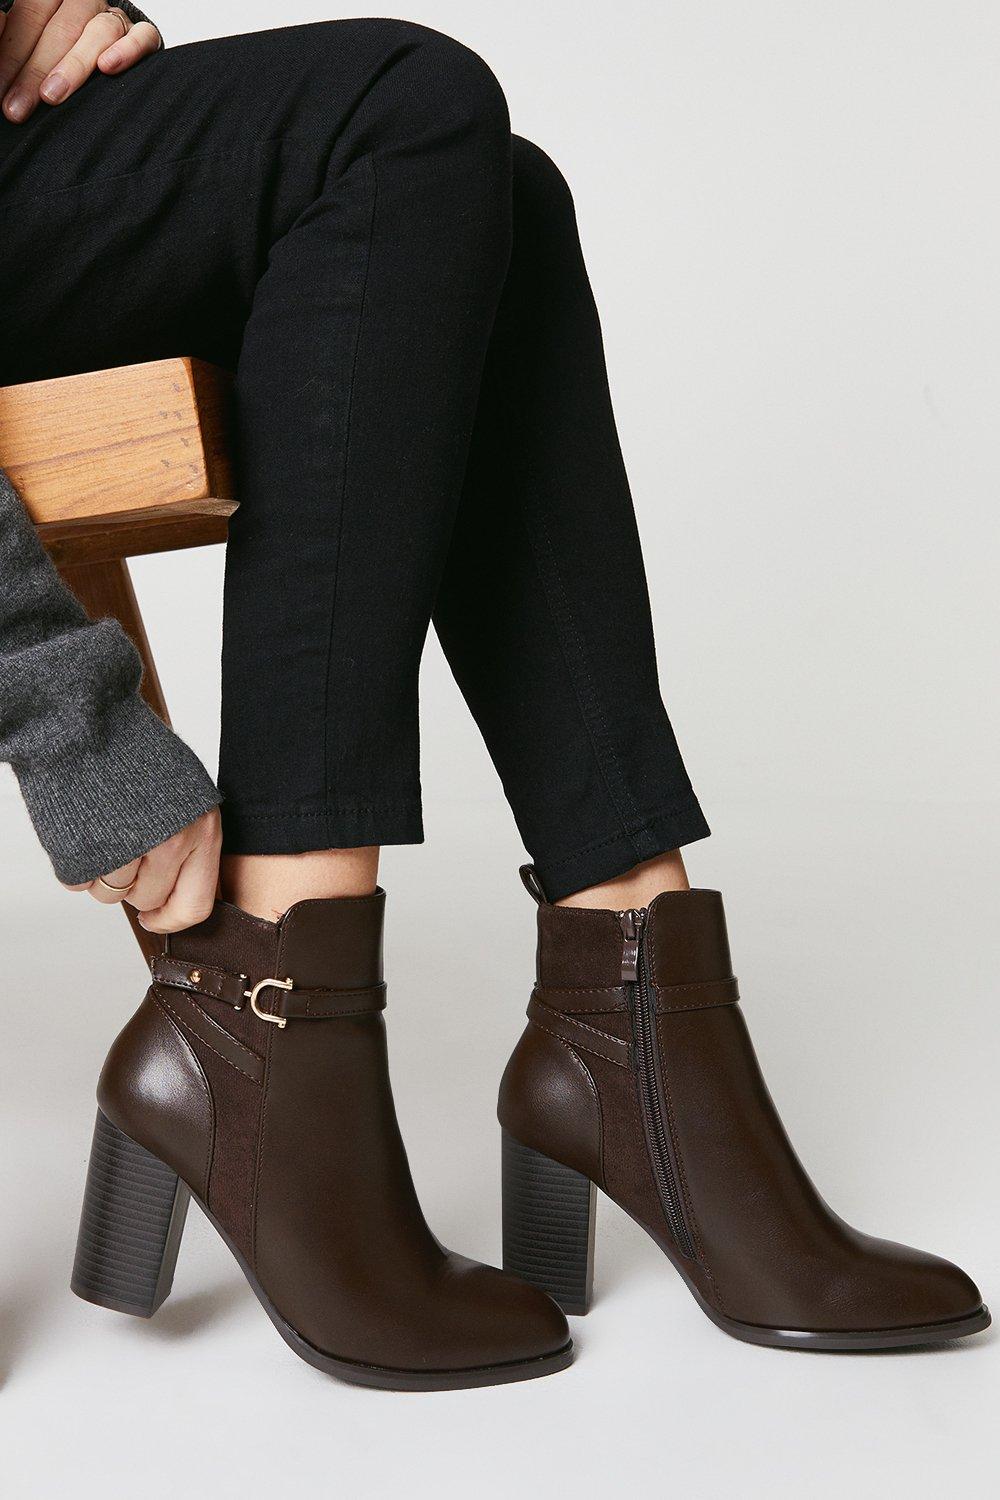 Boots | Jinnie Buckle Strap Detail High Block Heel Ankle Boots | Oasis